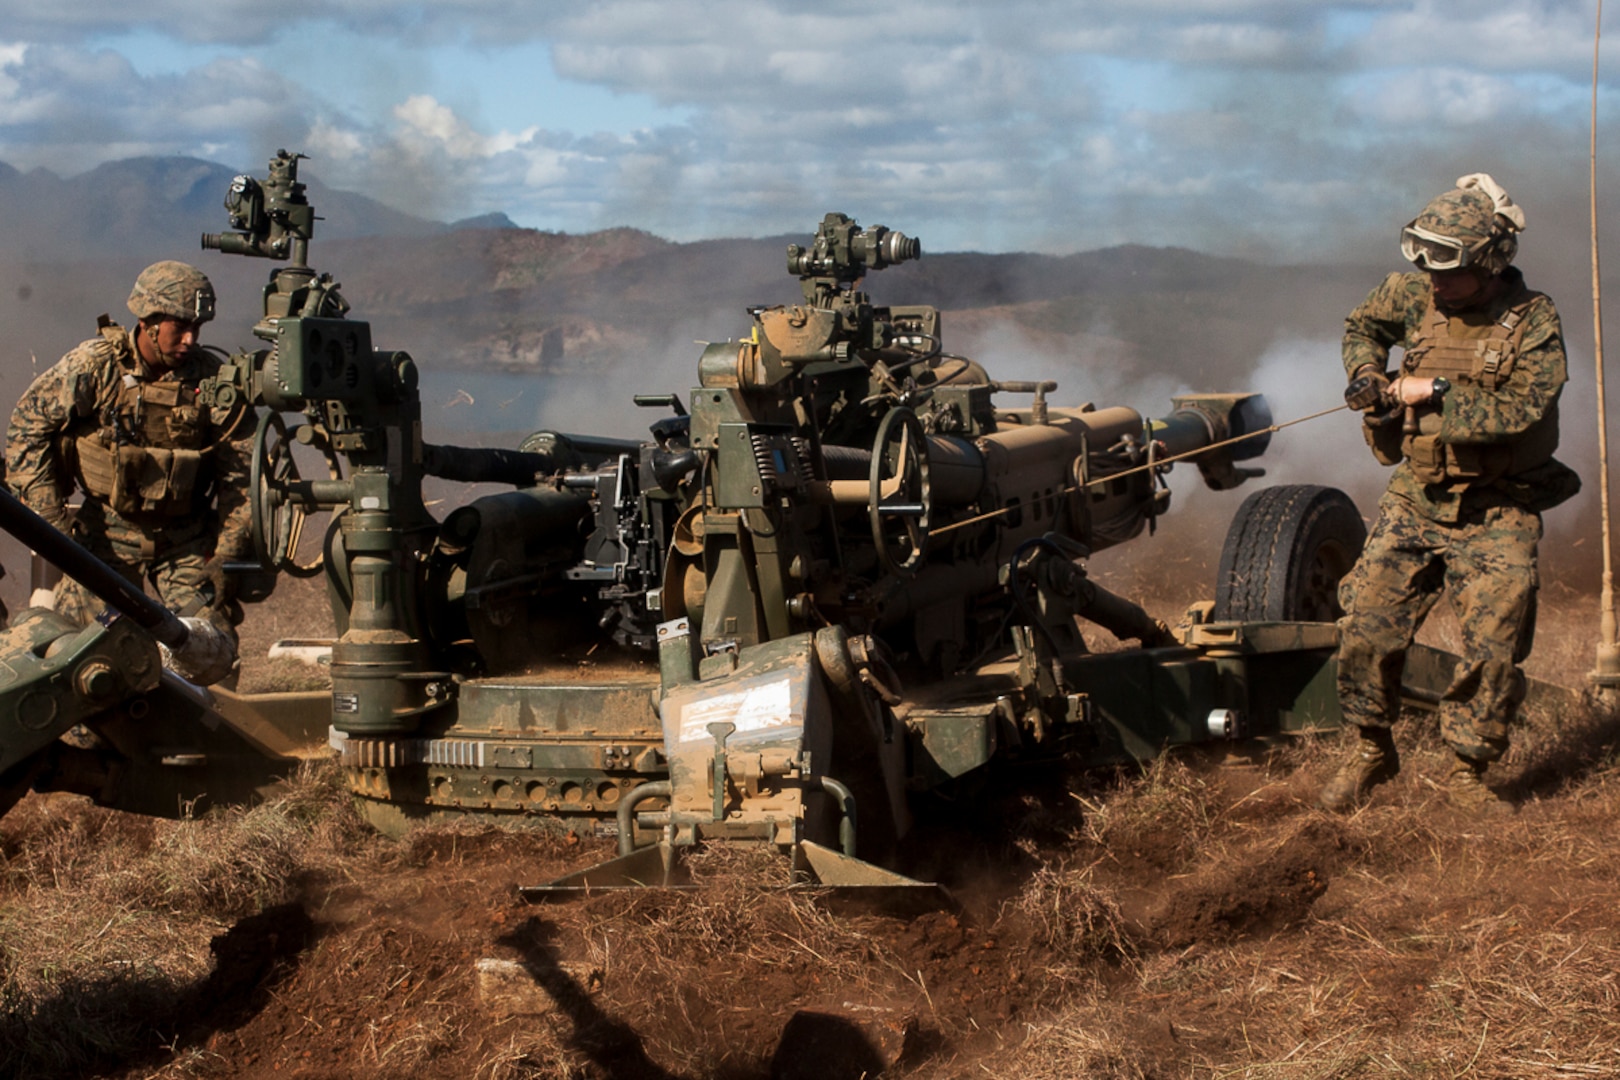 Marines with Golf Battery, Battalion Landing Team, 3rd Battalion, 5th Marines, fire an M777A2 155 mm howitzer as part of direct-fire training during Exercise Talisman Saber 17 on Townshend Island, Shoalwater Bay Training Area, Queensland, Australia, July 17, 2017. BLT 3/5 is the Ground Combat Element for the 31st Marine Expeditionary Unit, and is exploring state-of-the-art concepts and technologies as the dedicated force for Sea Dragon 2025, a Marine Corps initiative to prepare for future battles. Talisman Saber is a biennial exercise designed to improve the interoperability between Australian and U.S. forces. The 31st MEU is taking part in Talisman Saber 17 while deployed on a regularly-scheduled patrol of the Indo-Asia-Pacific region. (U.S. Marine Corps photo by Lance Cpl. Stormy Mendez/Released)